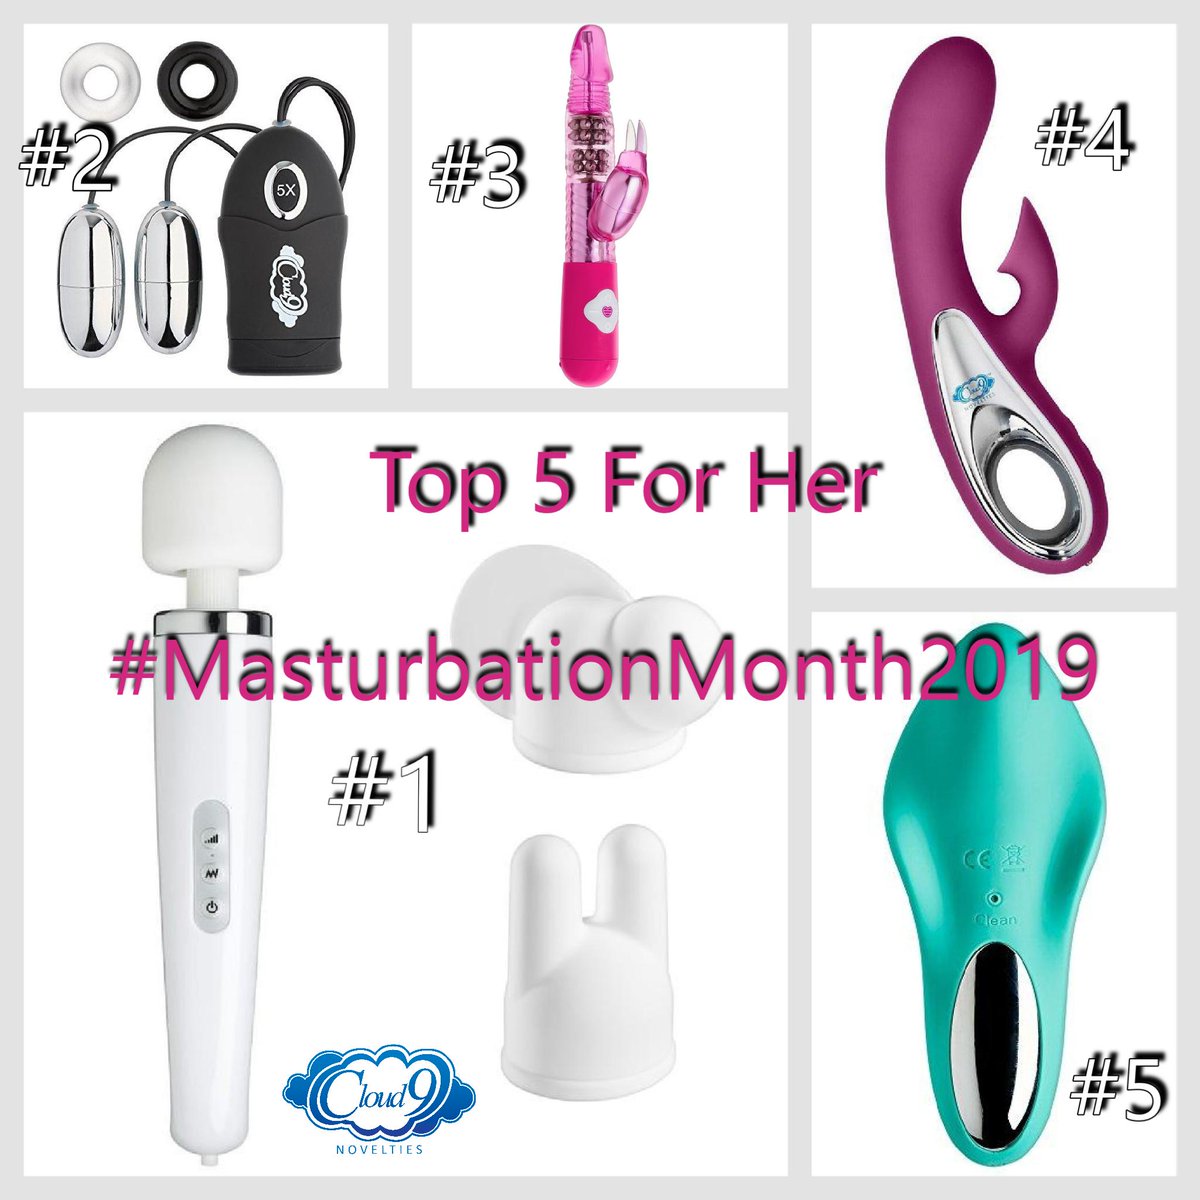 #MMonth Top 5 Sex Toys for Her #1 cloud9novelties.com/products/wand-… #2 cloud9novelties.com/products/rabbit #3 cloud9novelties.com/products/doubl… #4 cloud9novelties.com/products/air-t… #5 cloud9novelties.com/products/air-t… . . #MasturbationMonth2019 #Cloud9Novelties #Top5List #ForHer #SexualHealthWellness